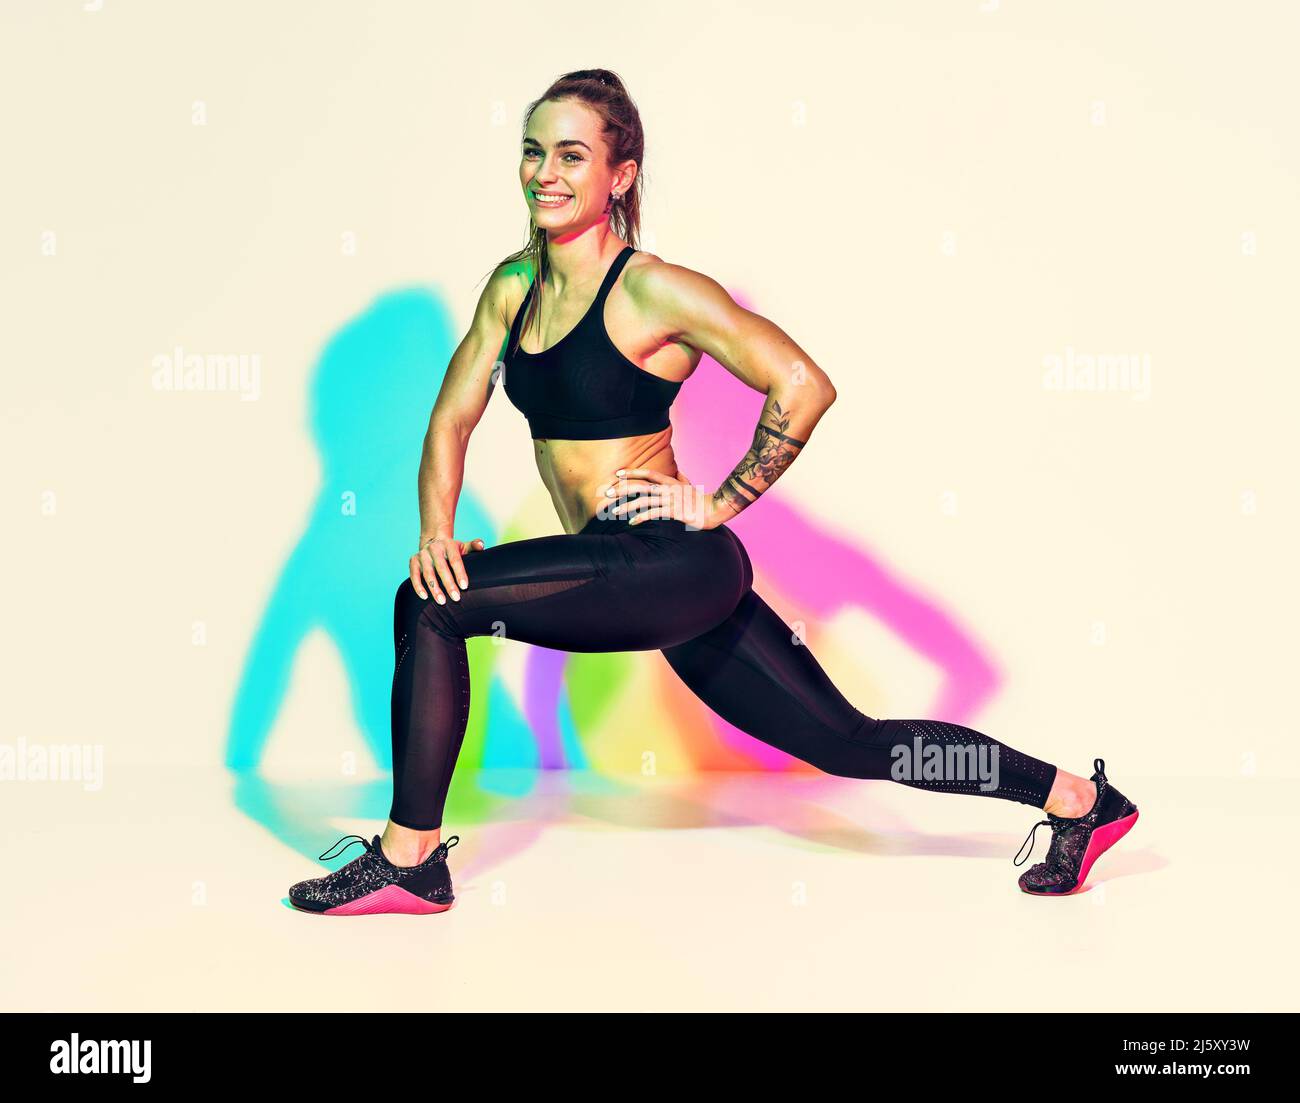 Warming up before training. Photo of laughing woman in black sportswear on white background with effect of rgb colors shadows. Sports motivation and h Stock Photo